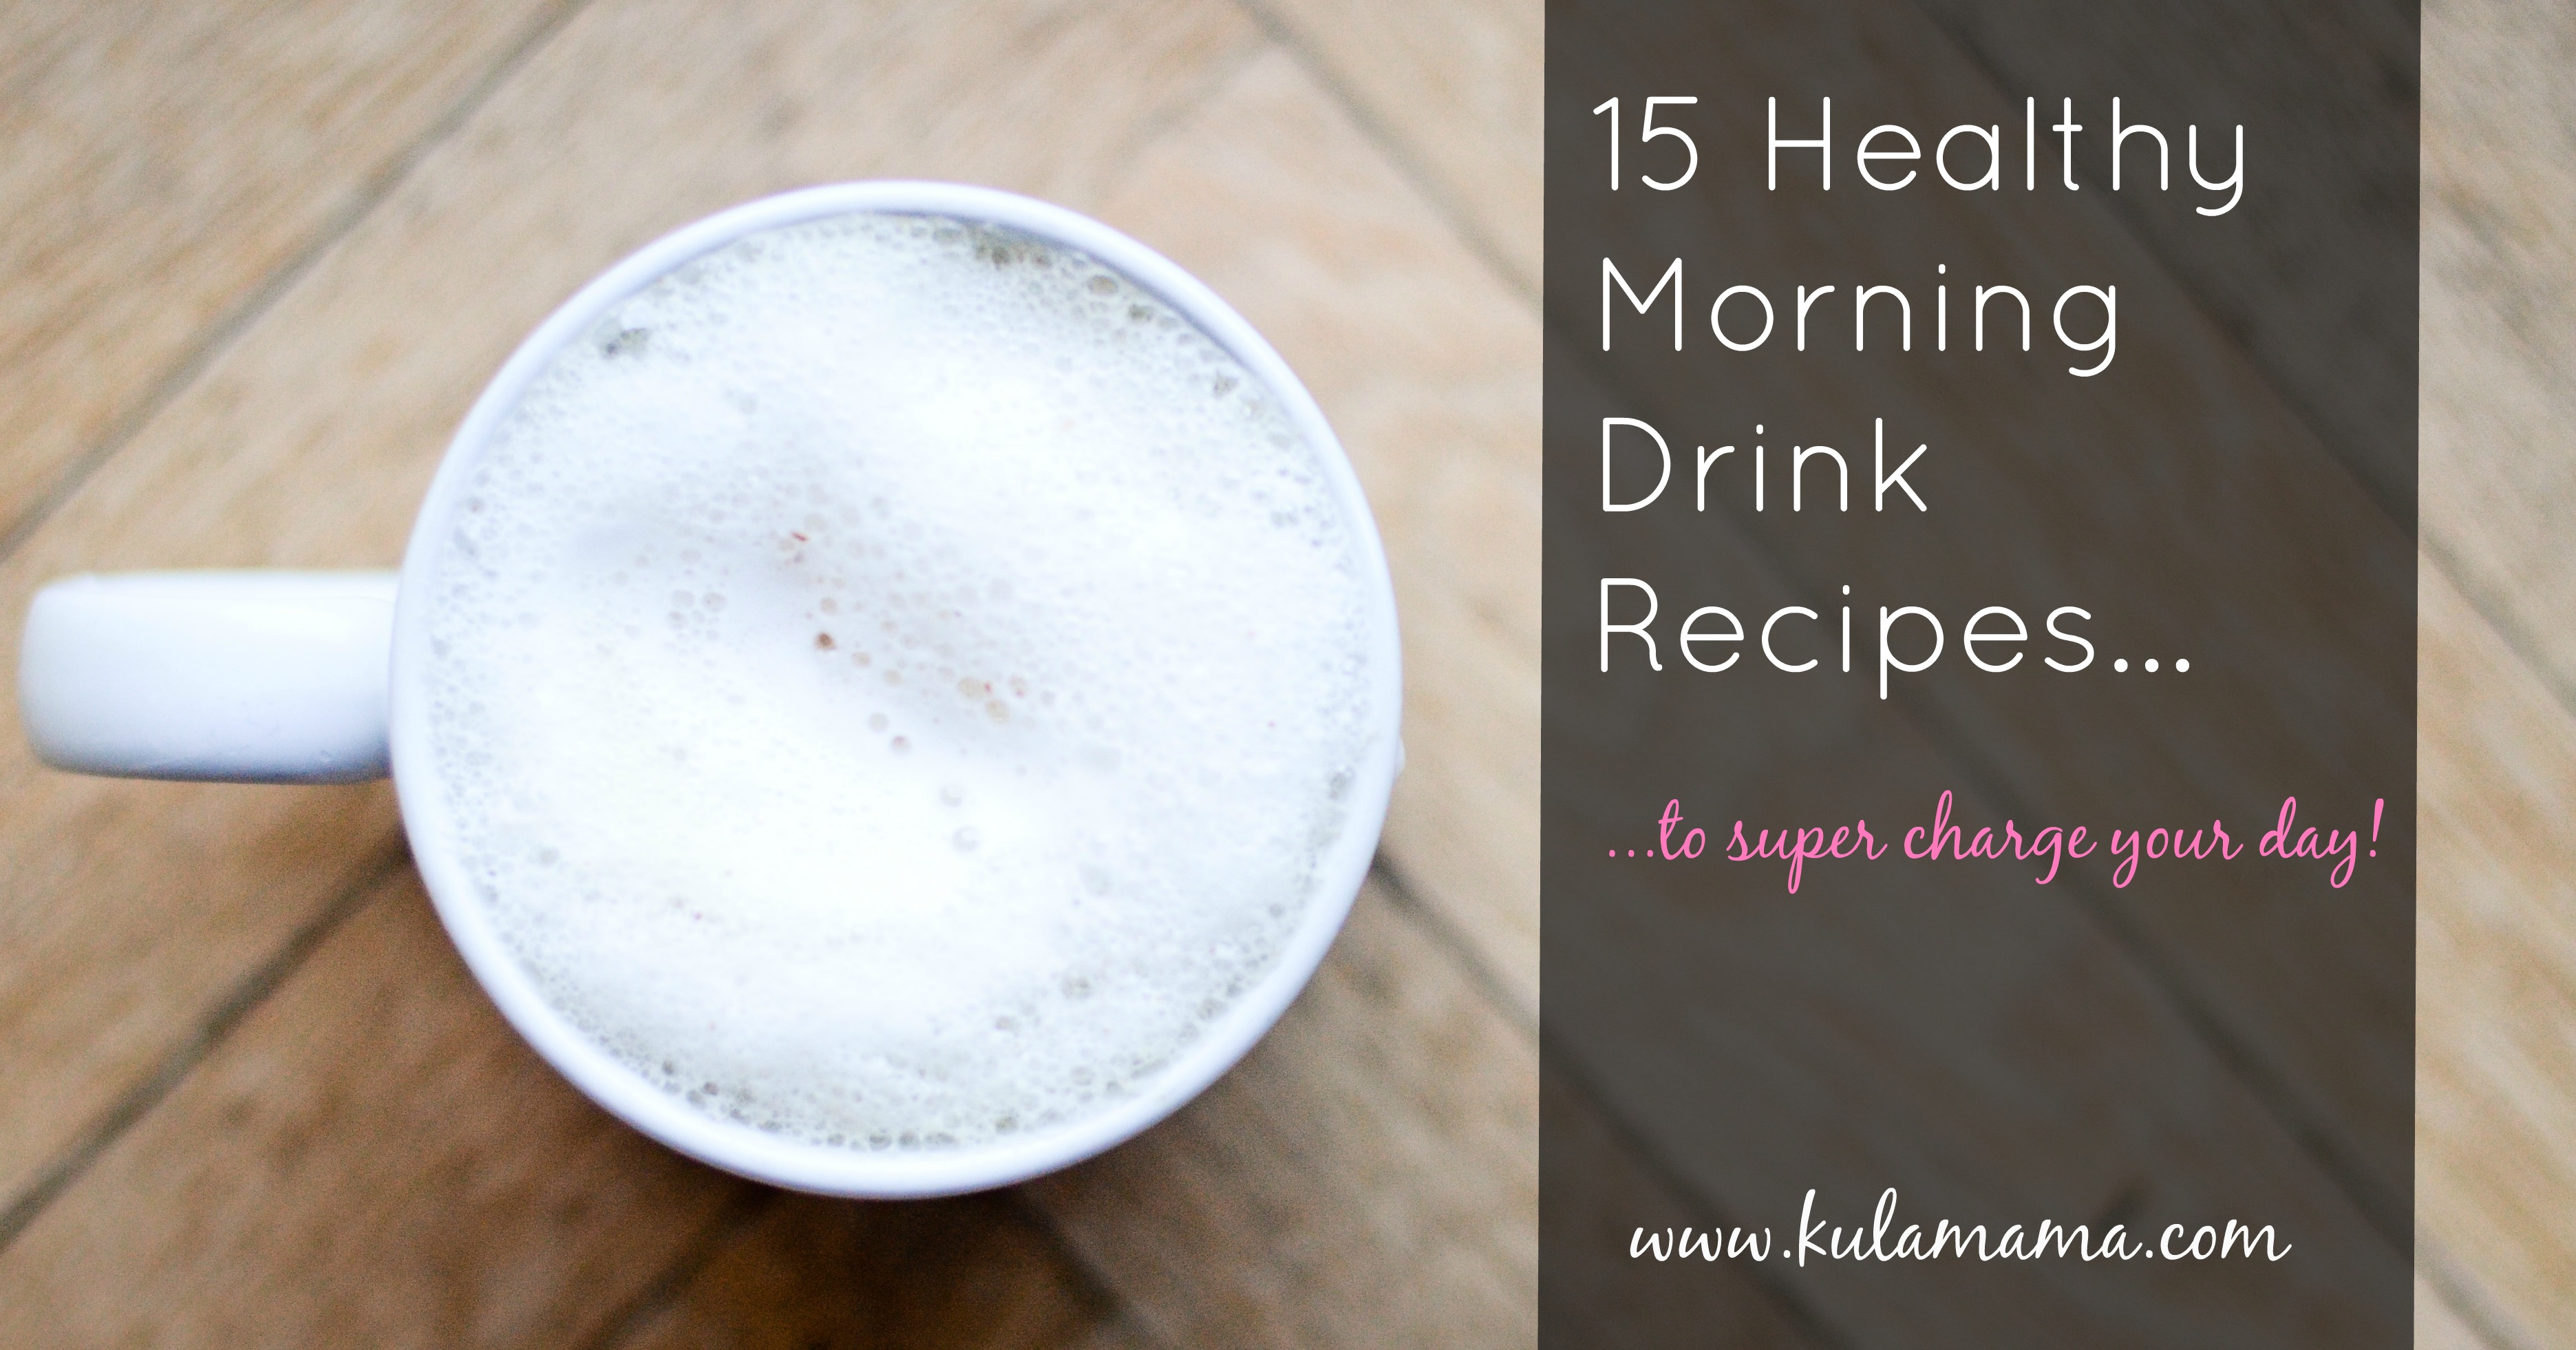 15 Healthy Morning Drink Recipes to SUPER Charge Your Day!